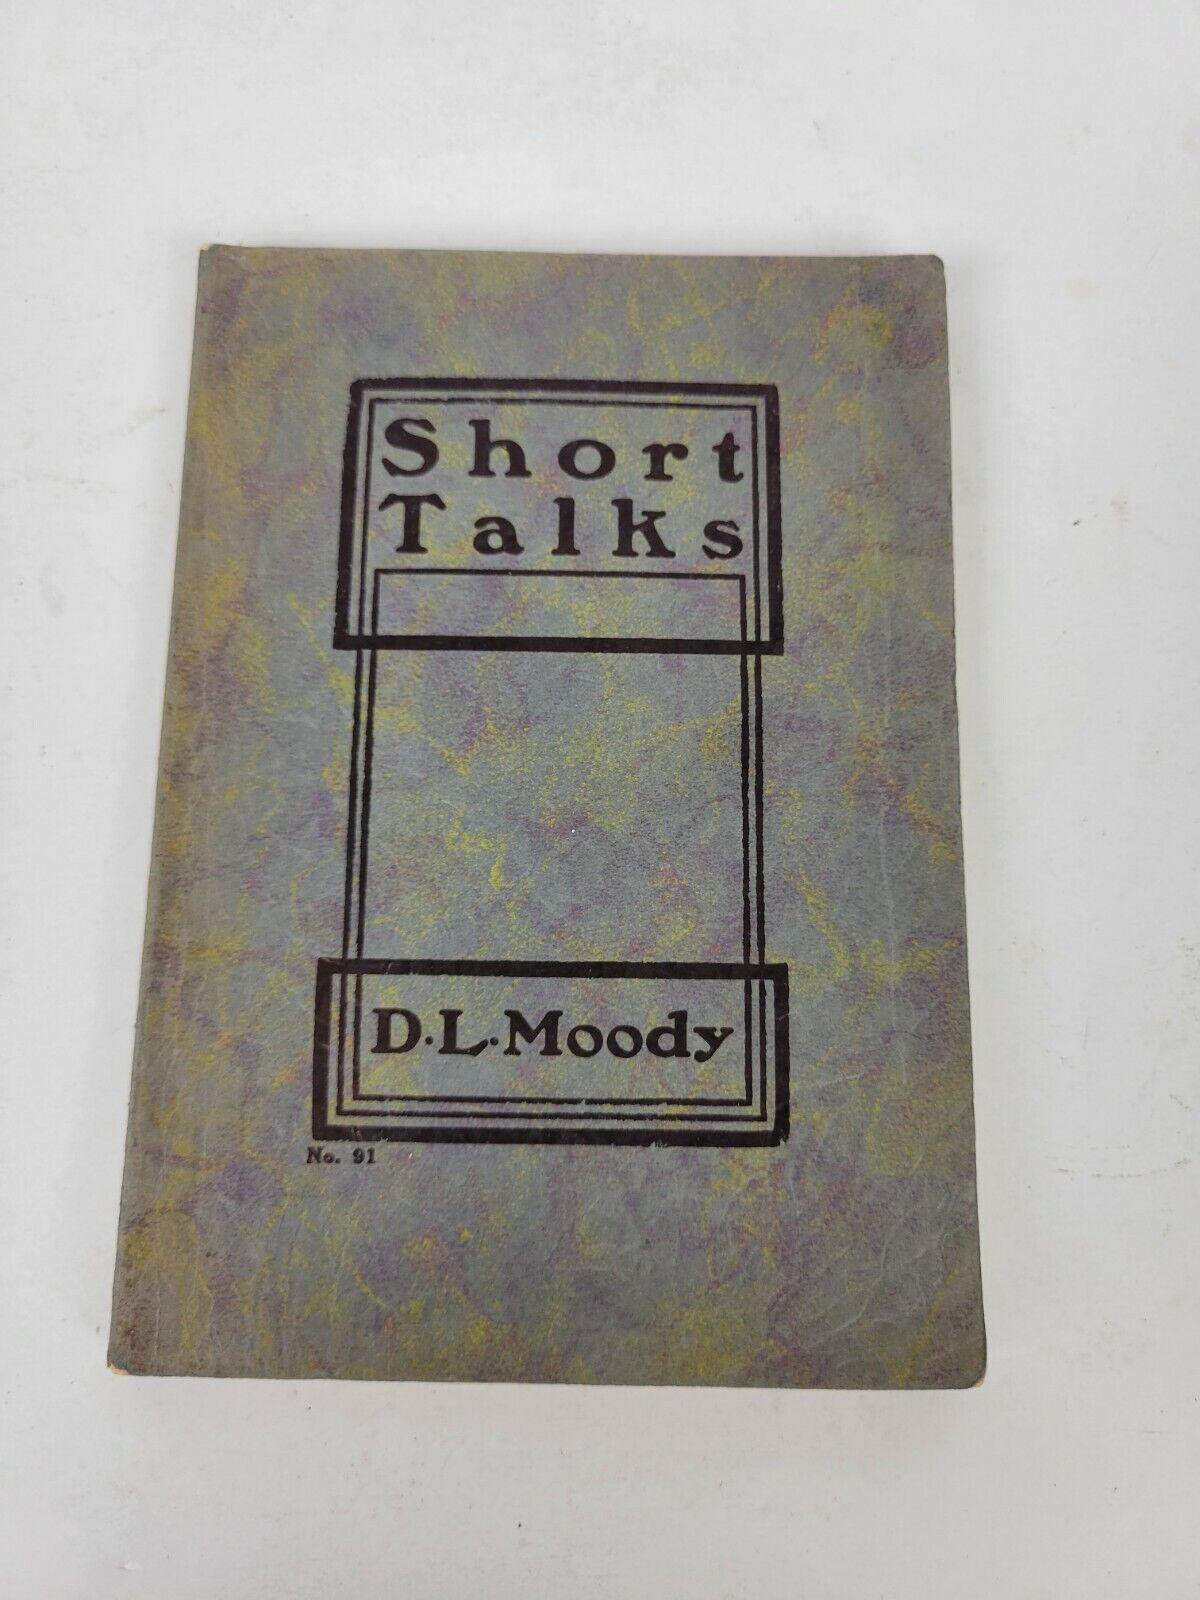 Short Talks by D.L. Moody - Printed in Chicago 1900